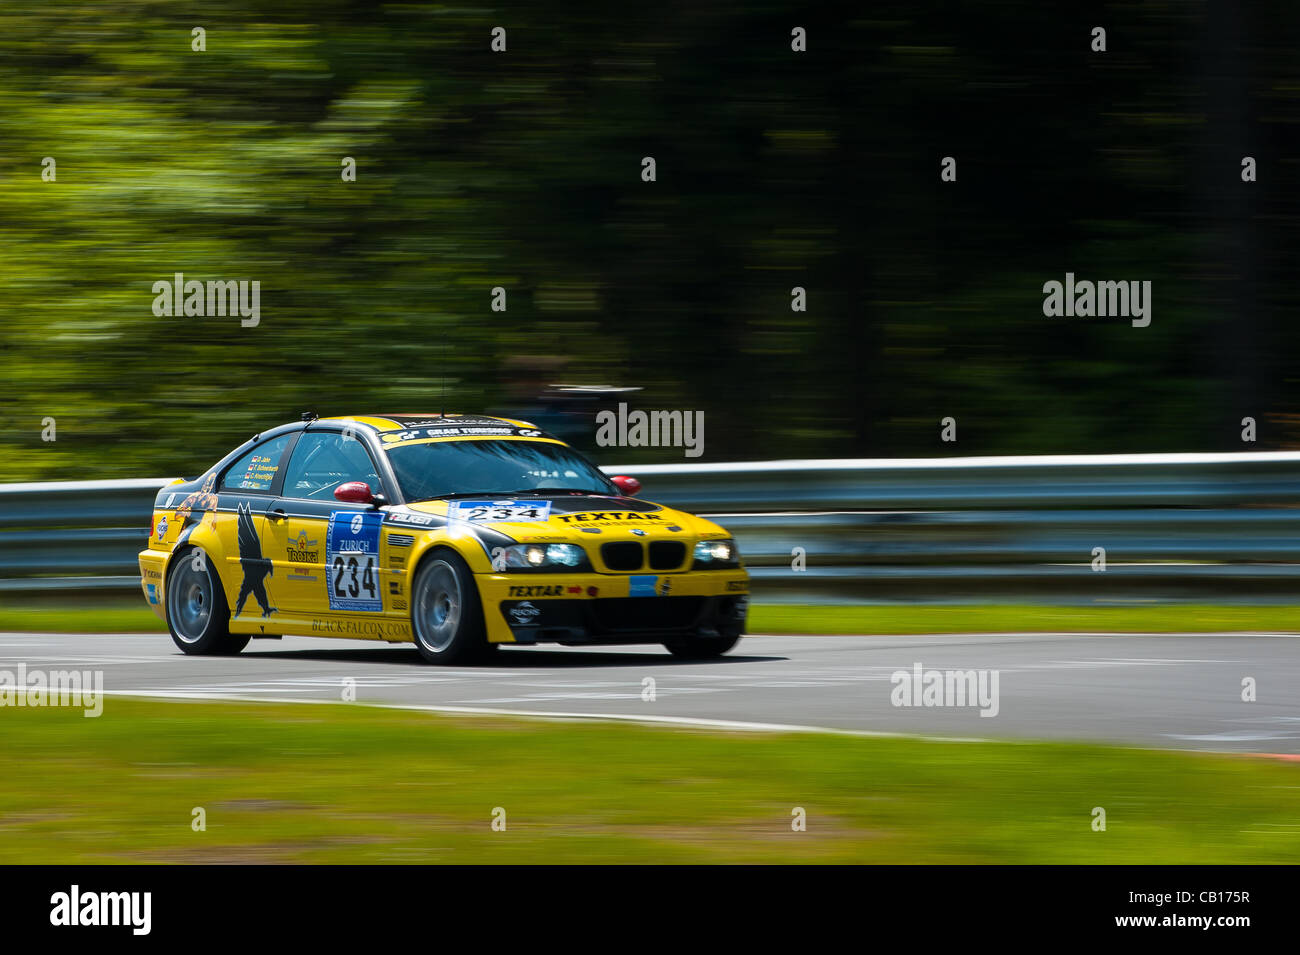 Steve Jans (LUX) / Tim Scheerbarth (GER) / Carsten Knechtges (GER) driving the #234 V6 Black Falcon Team TMD Friction BMW M3 during qualifying for the Nurburgring 24 hour race near Nurburg, Germany on May 18, 2012. Photo: Matt Jacques Stock Photo